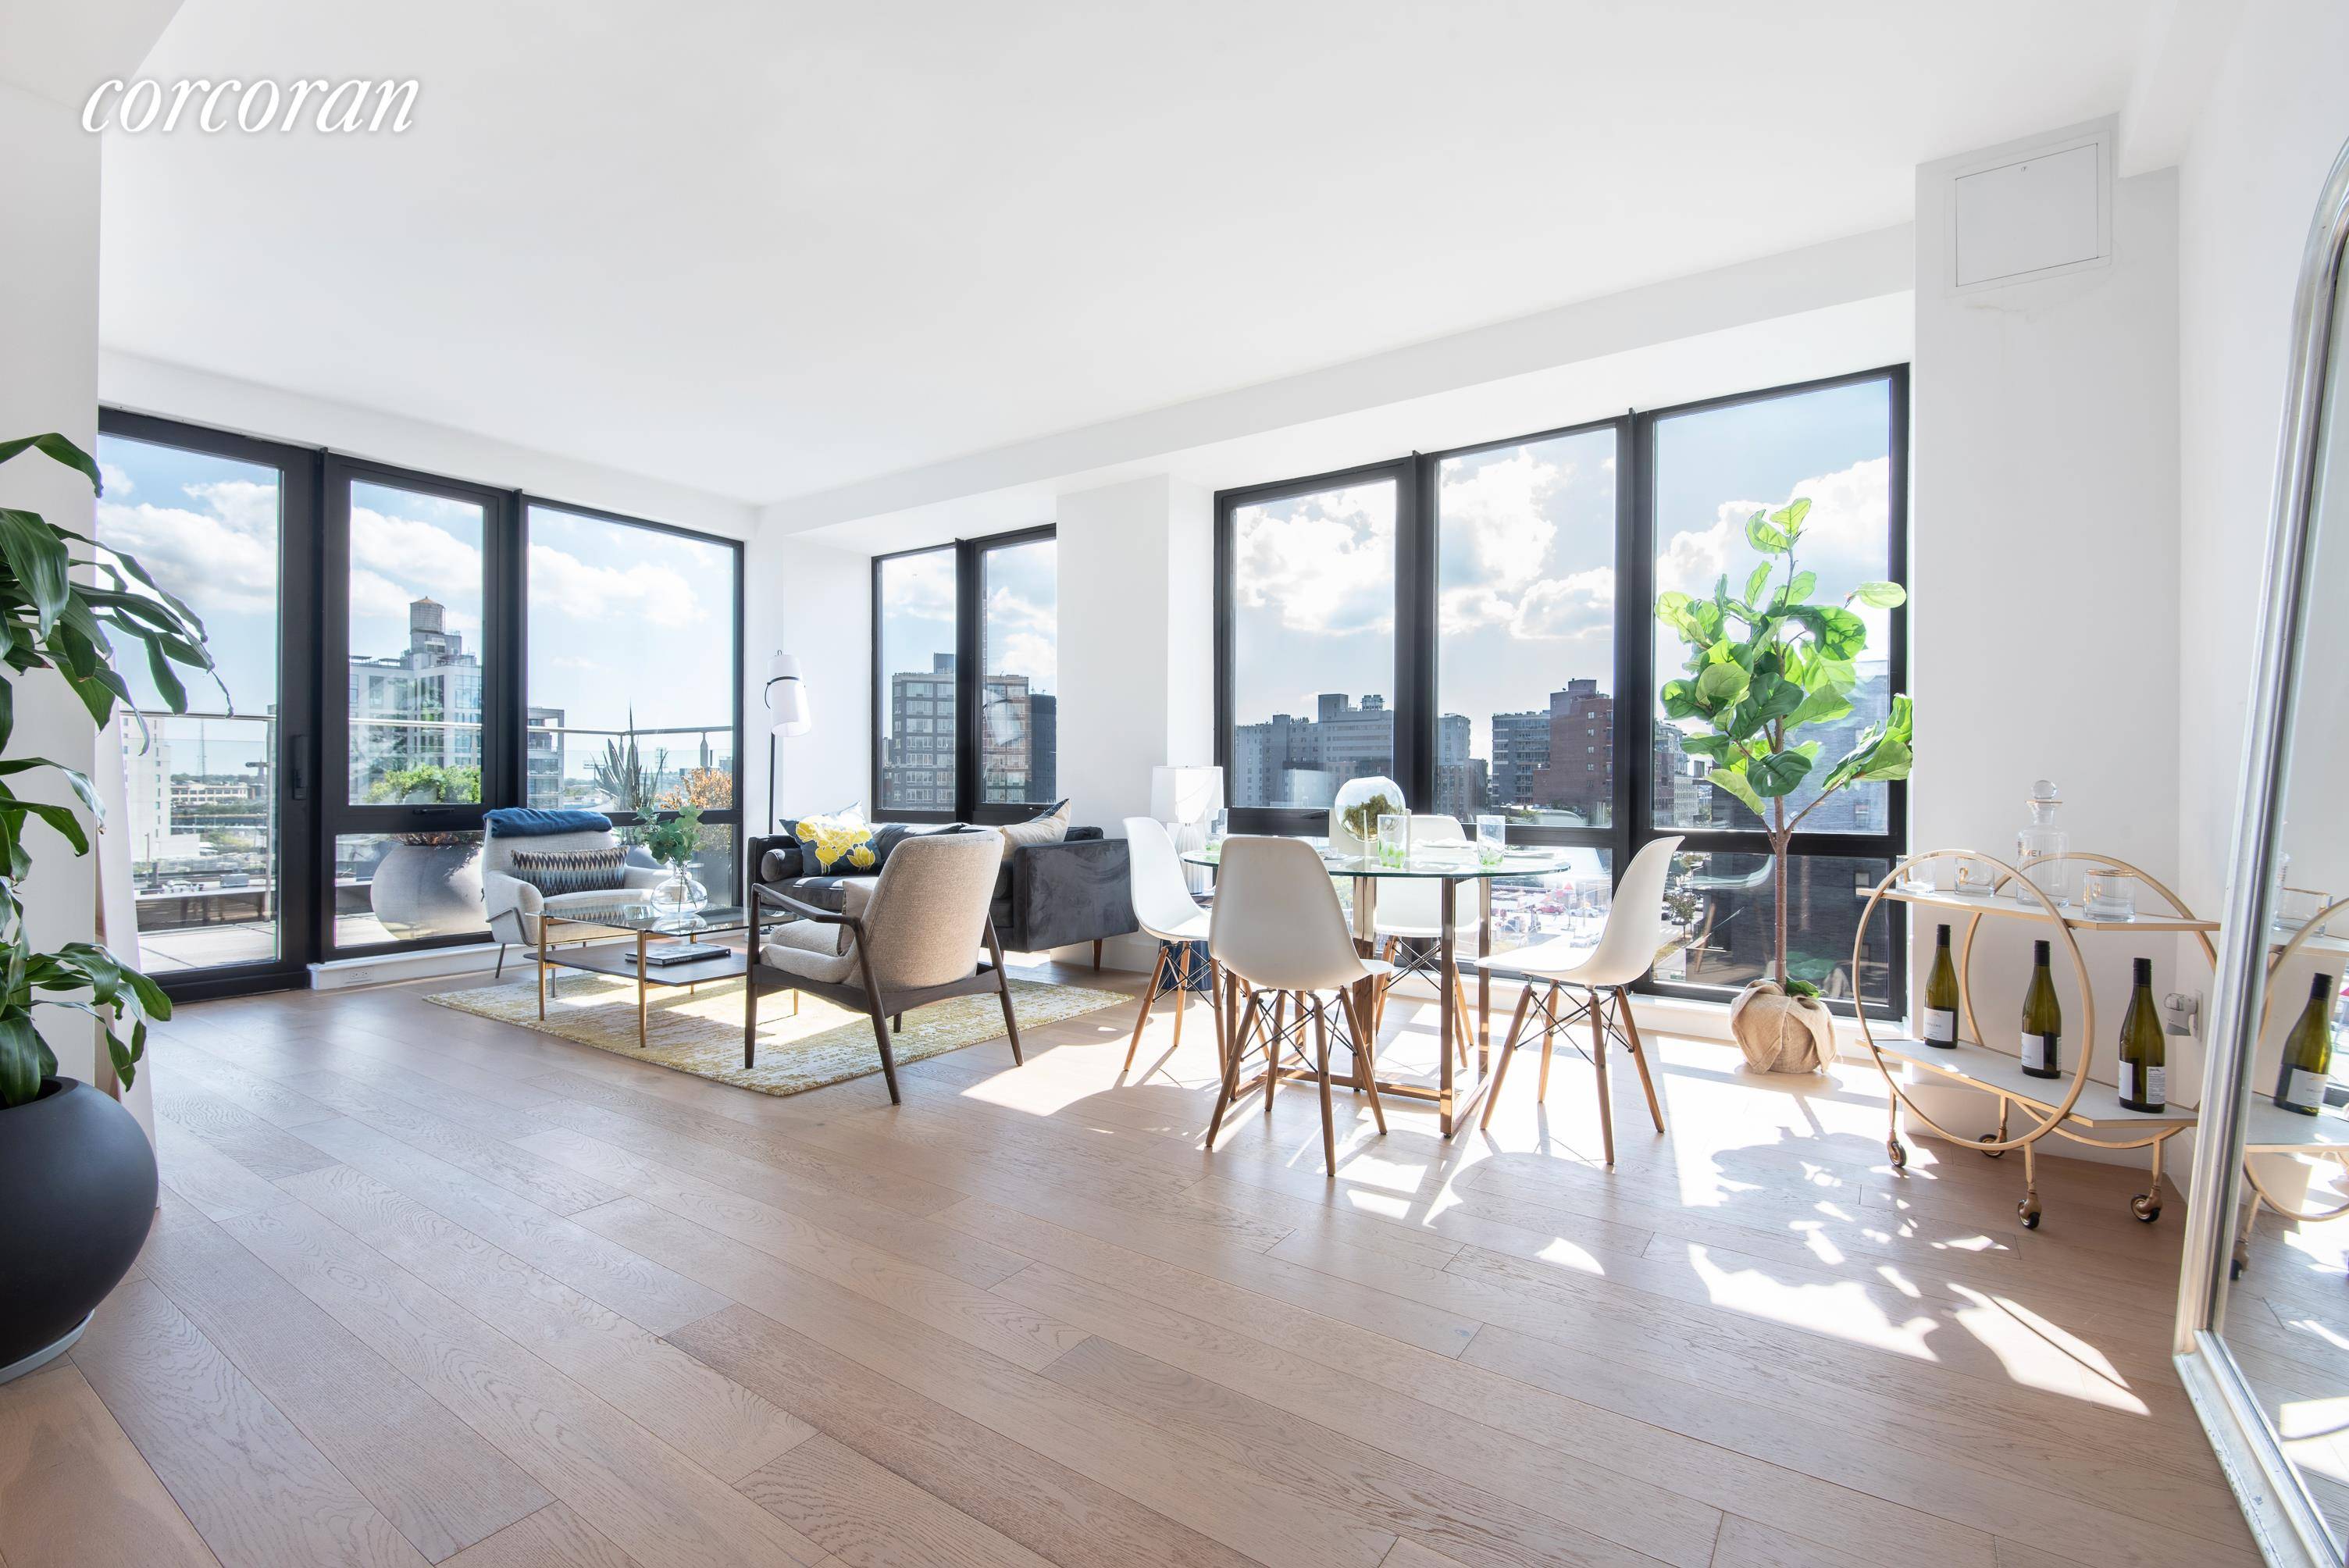 Residence 7B at The Bond is a spectacular corner living room unit with three bedrooms, two baths, 1, 390 interior square feet and an expansive terrace consisting of 172 exterior ...